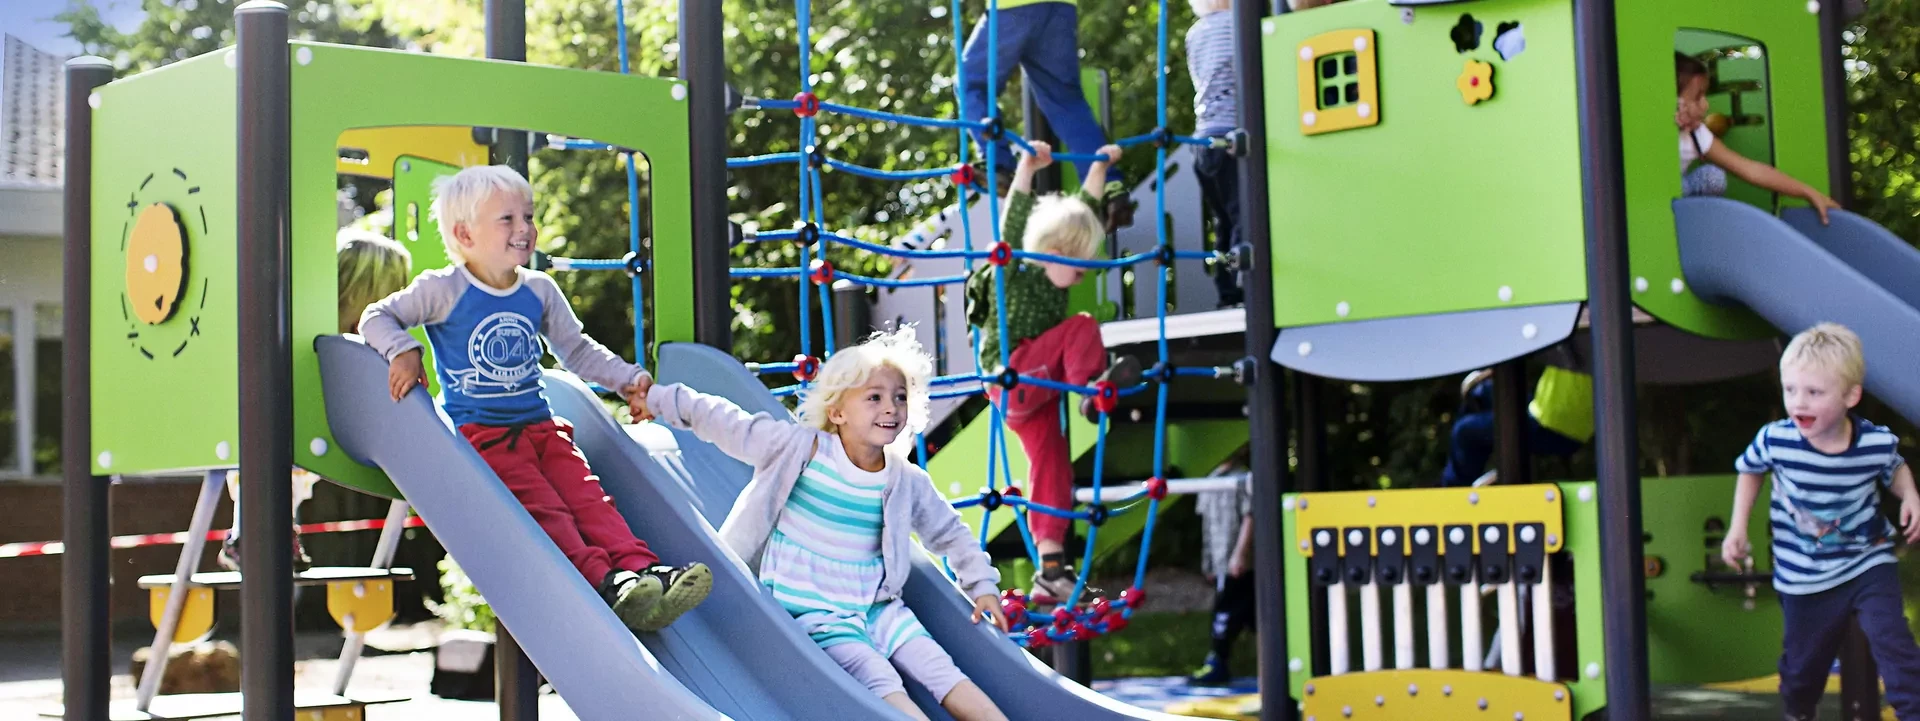 Children having fun sliding and climbing on a MOMENT play system